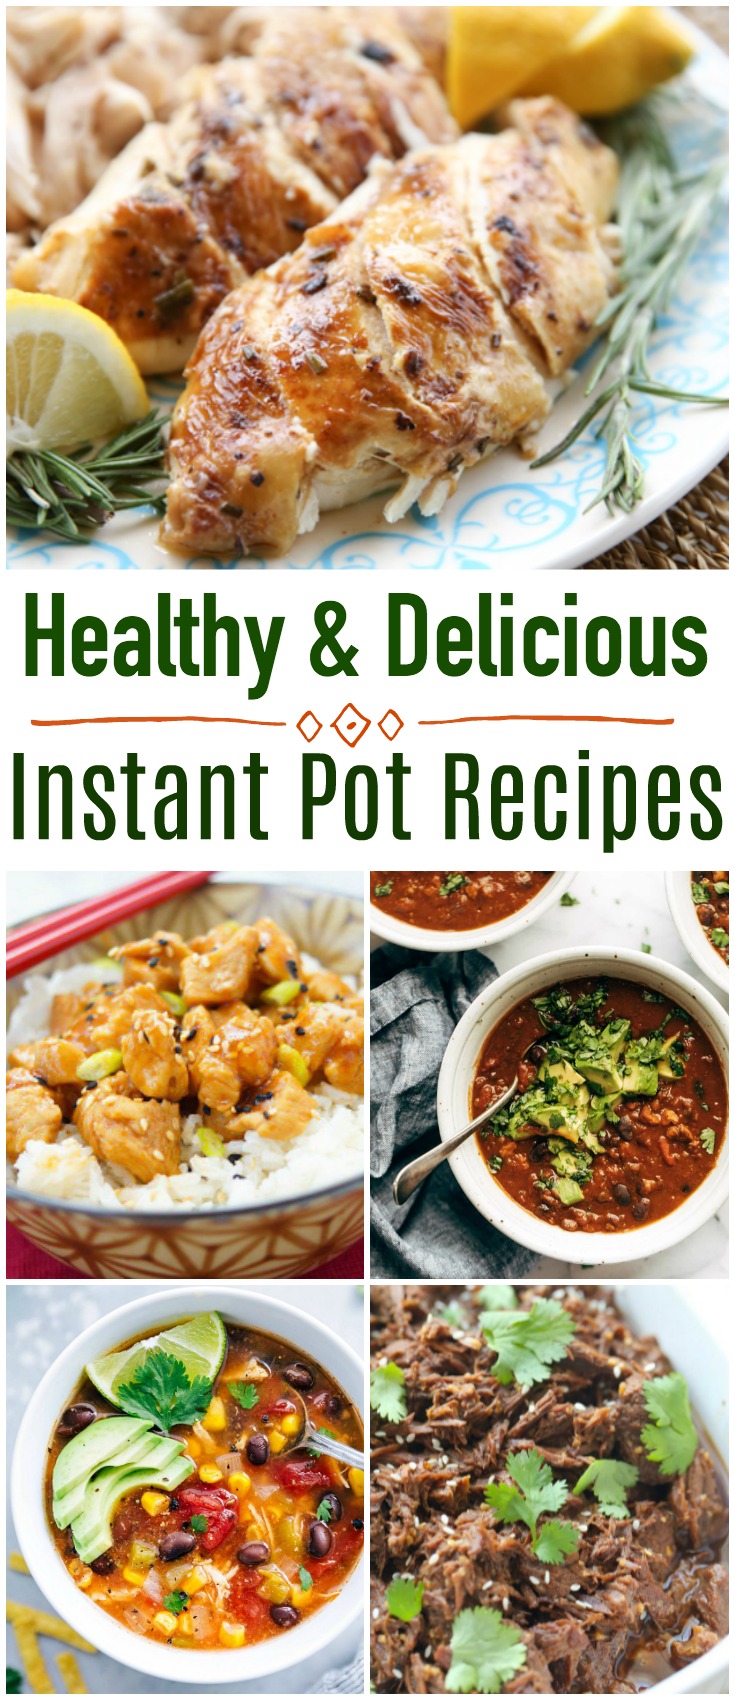 Did you recently buy an Instant Pot? it's a wonderful appliance to help you save money and eat better. Here are 20 Healthy and Delicious Instant Pot recipes you will want to keep handy! #InstantPot #PressureCooker #healthyrecipes #easyrecipes